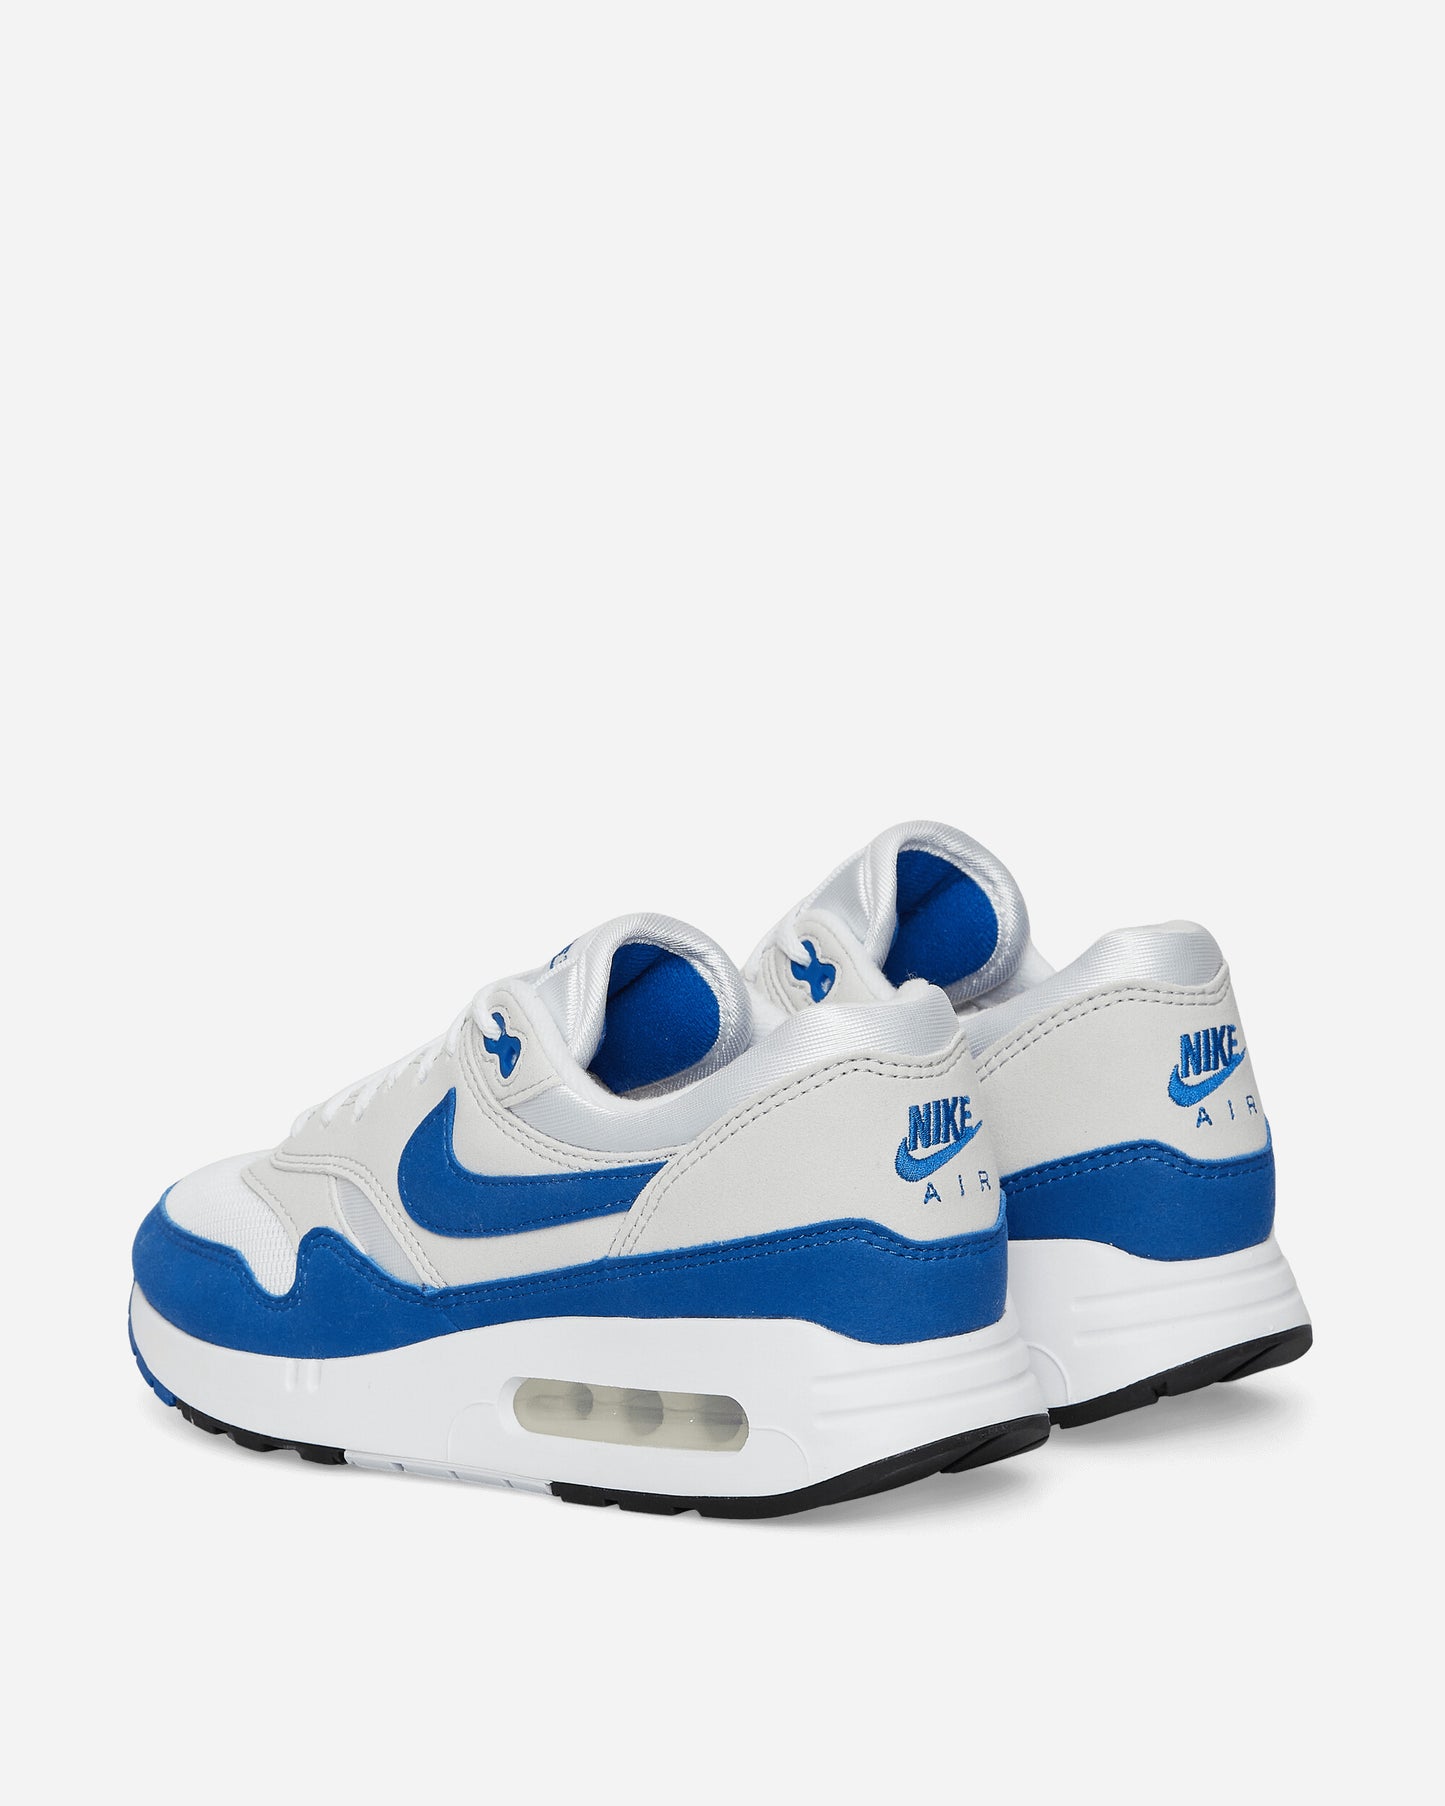 Nike Wmns Nike Air Max 1 '86 Og White/Royal Blue Sneakers Low DO9844-101